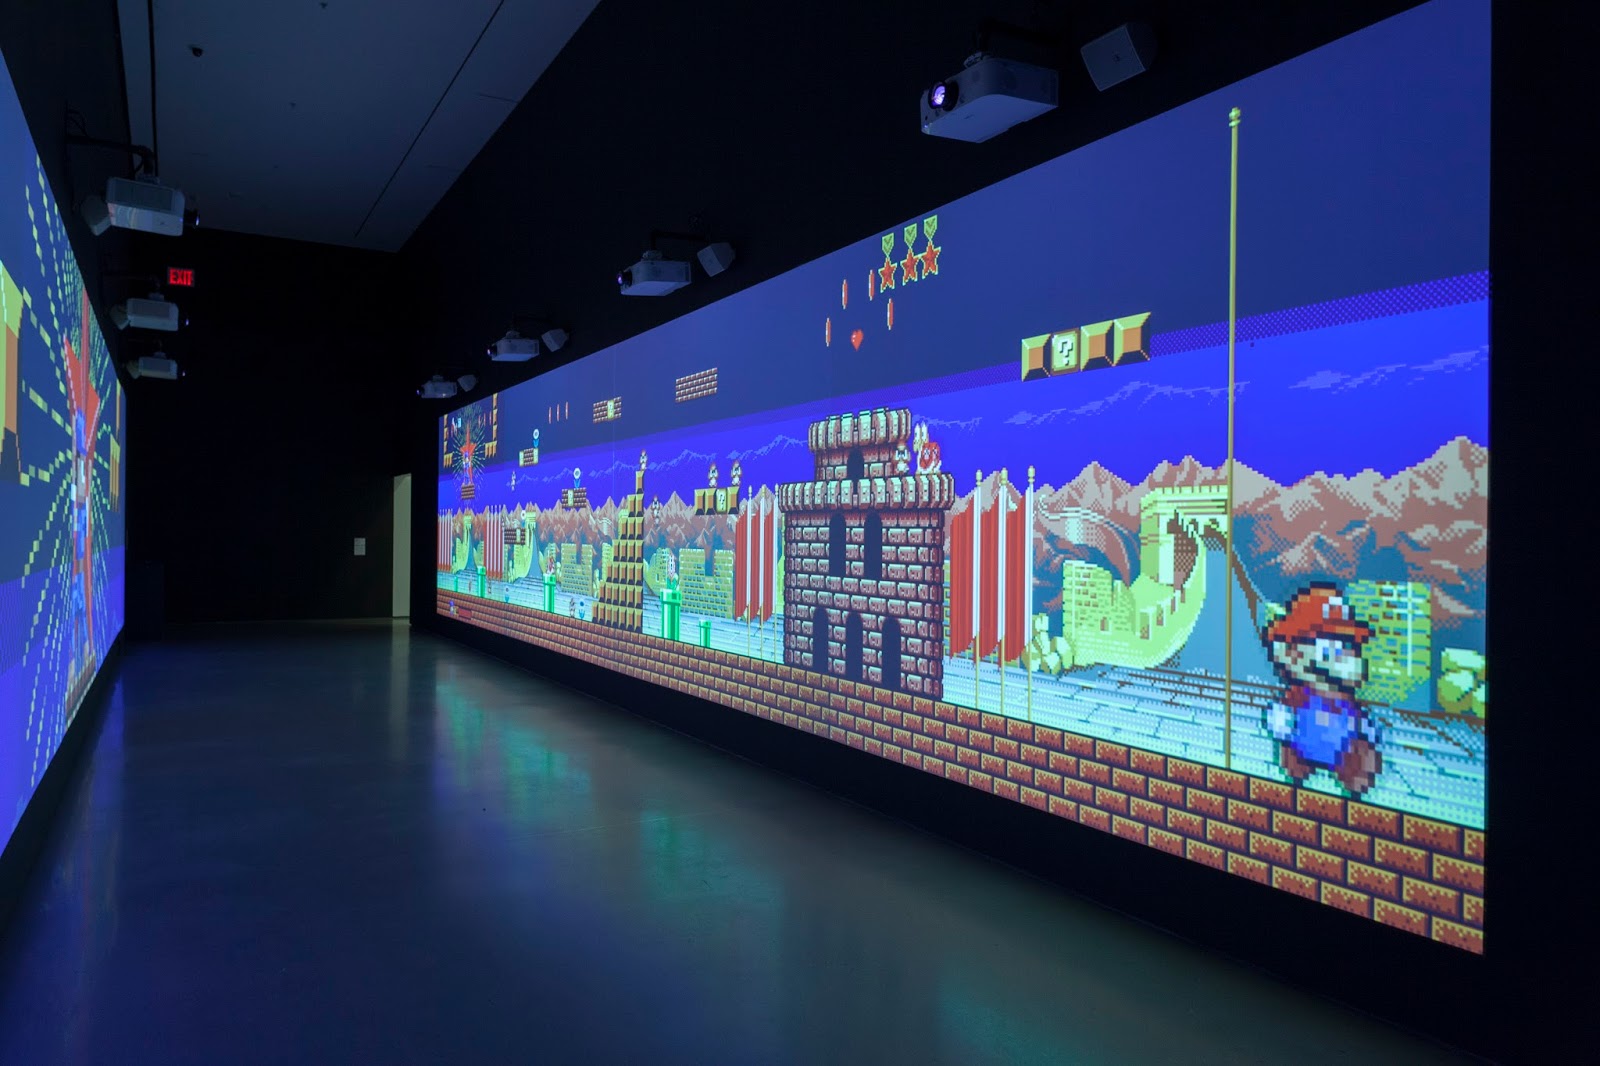 The Evolution of Video Games Art in the MoMA